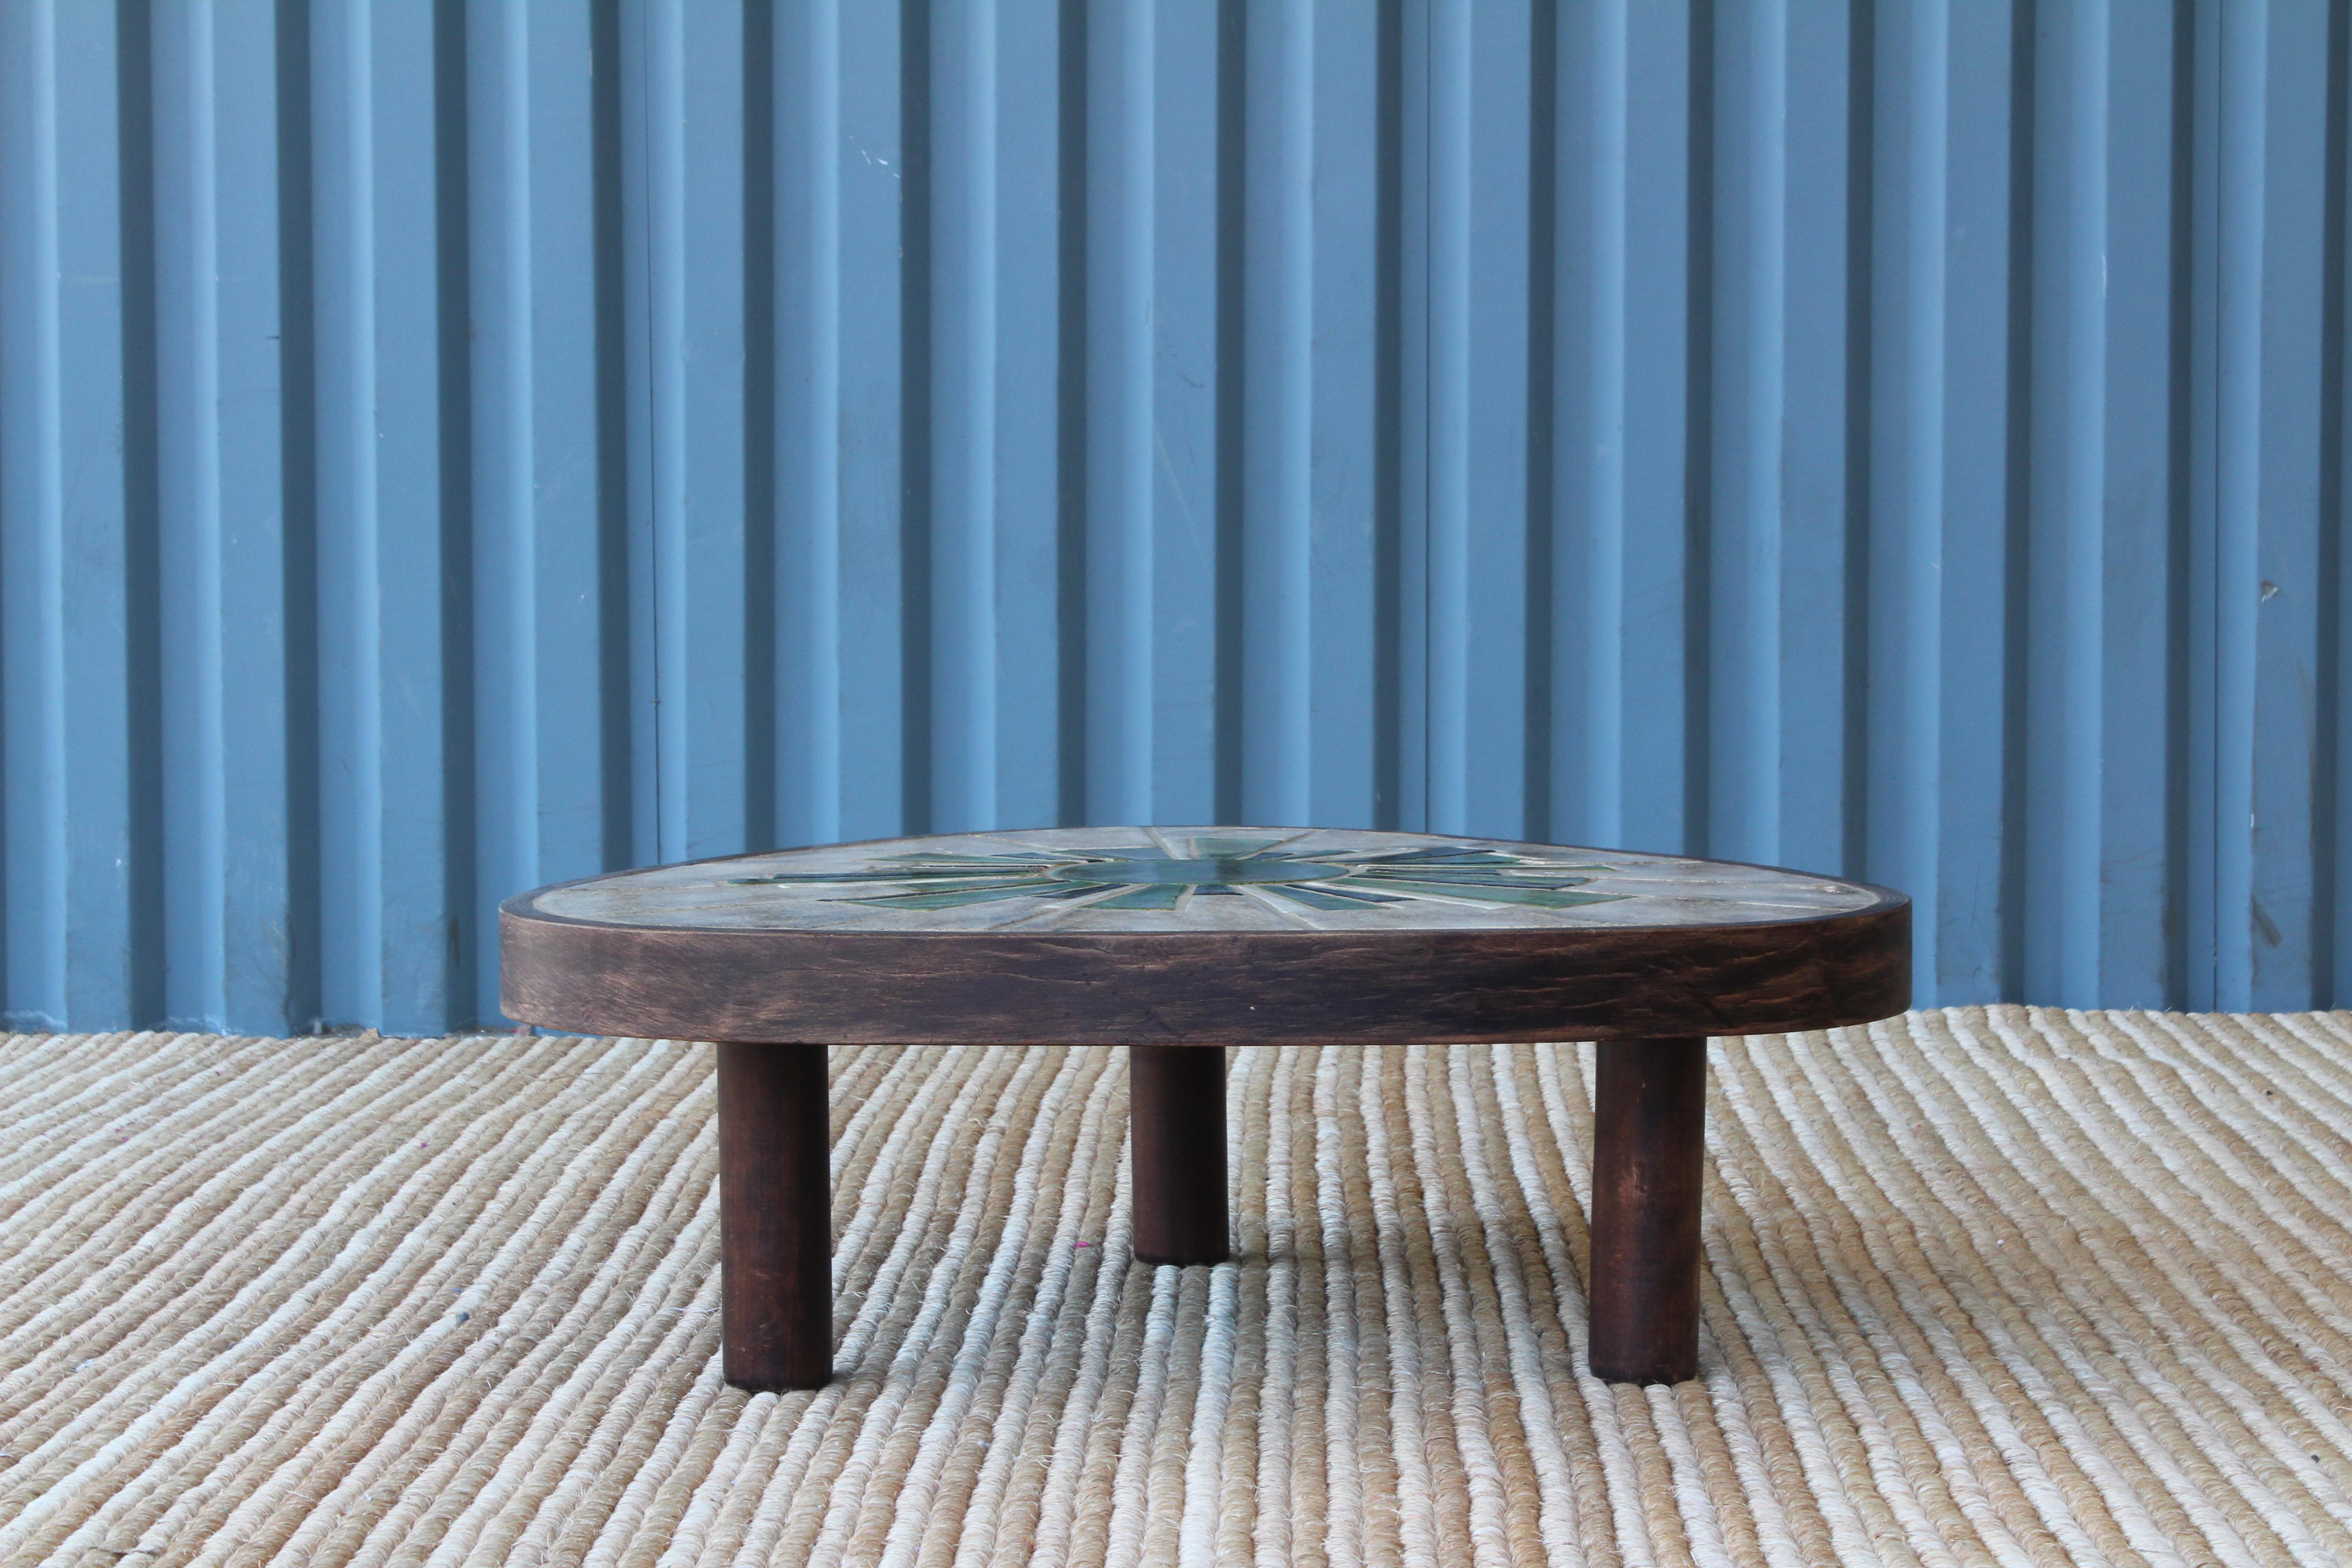 Three-sided tile topped coffee table by Barrois for Vallauris, France, 1960s.
 